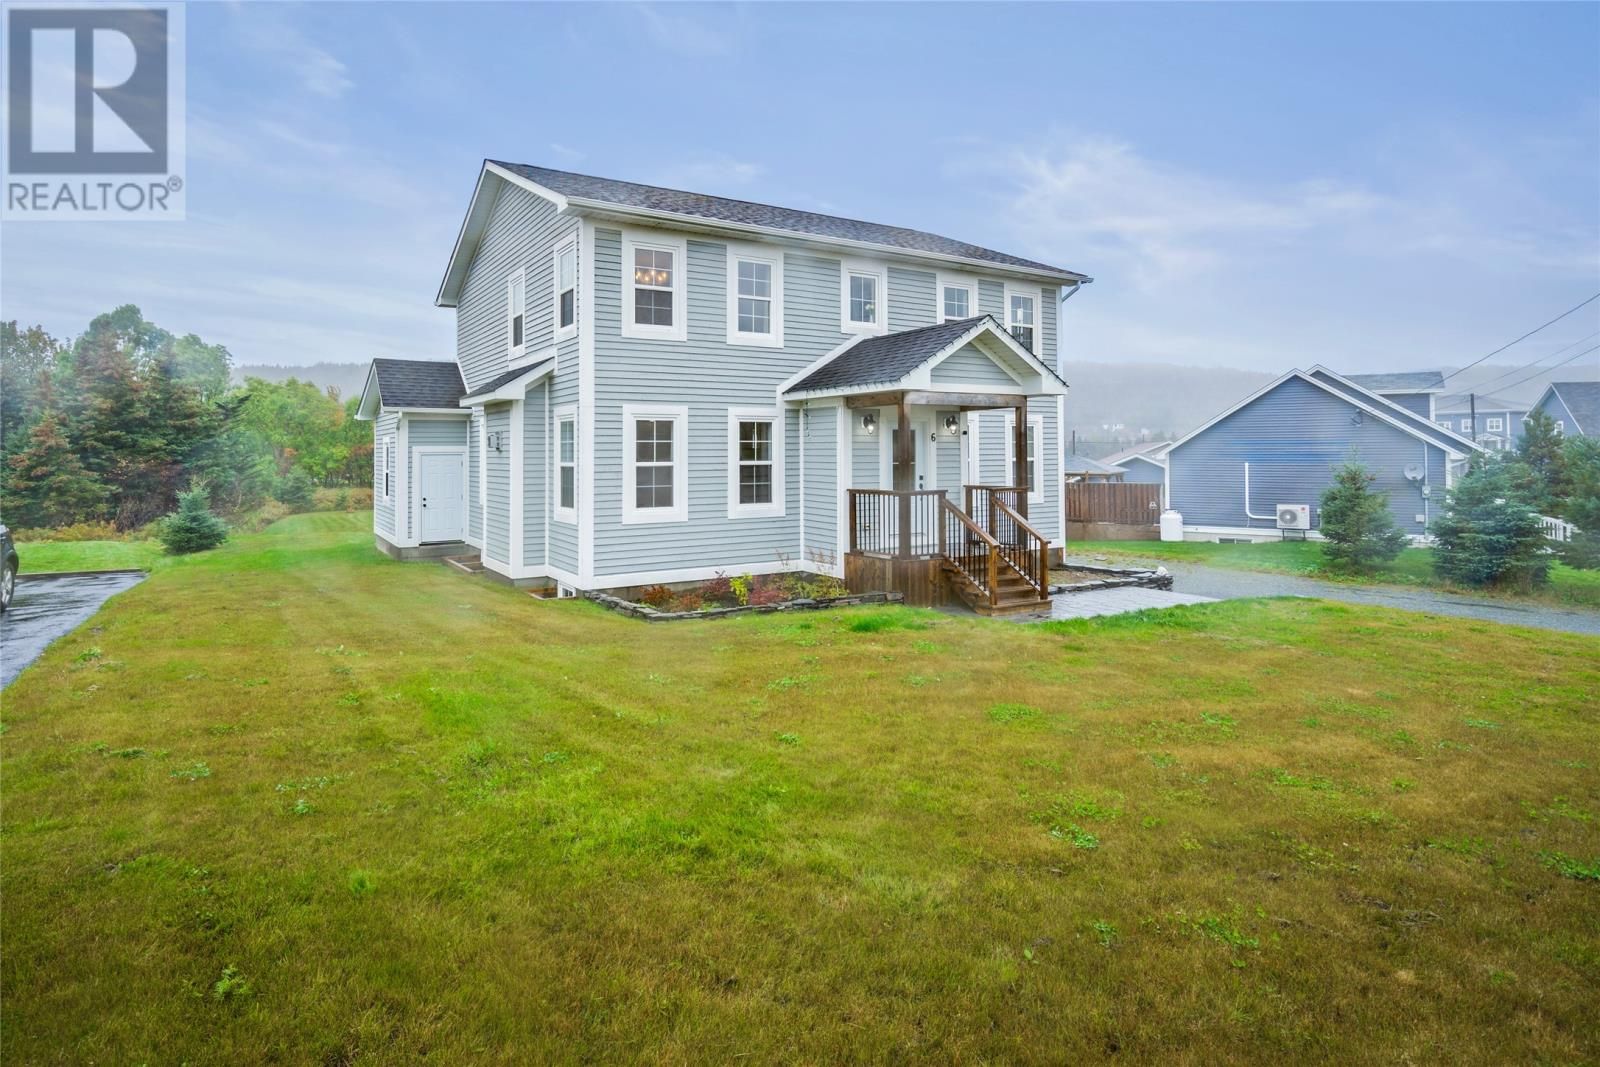 Main Photo: 6 Blueberry Place in Brigus: House for sale : MLS®# 1264757